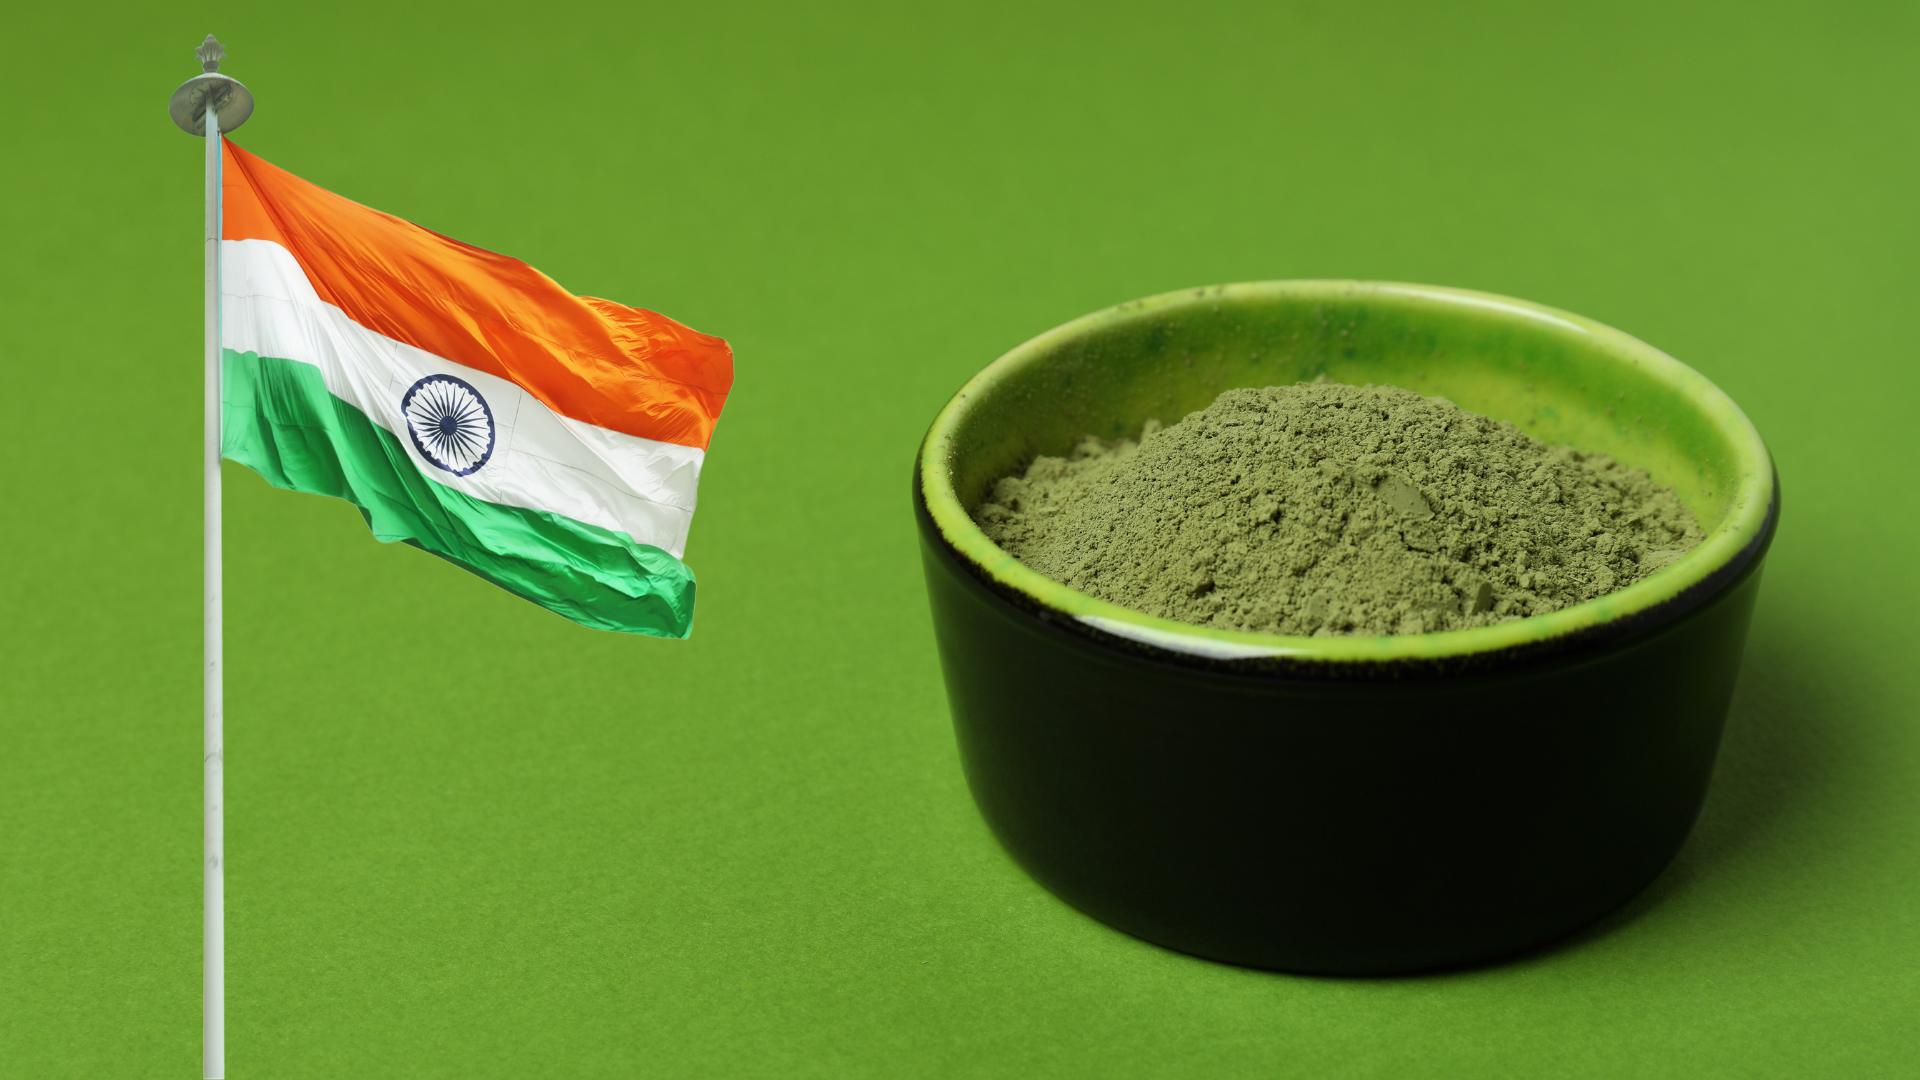 Bowl of matcha powder and the Indian flag